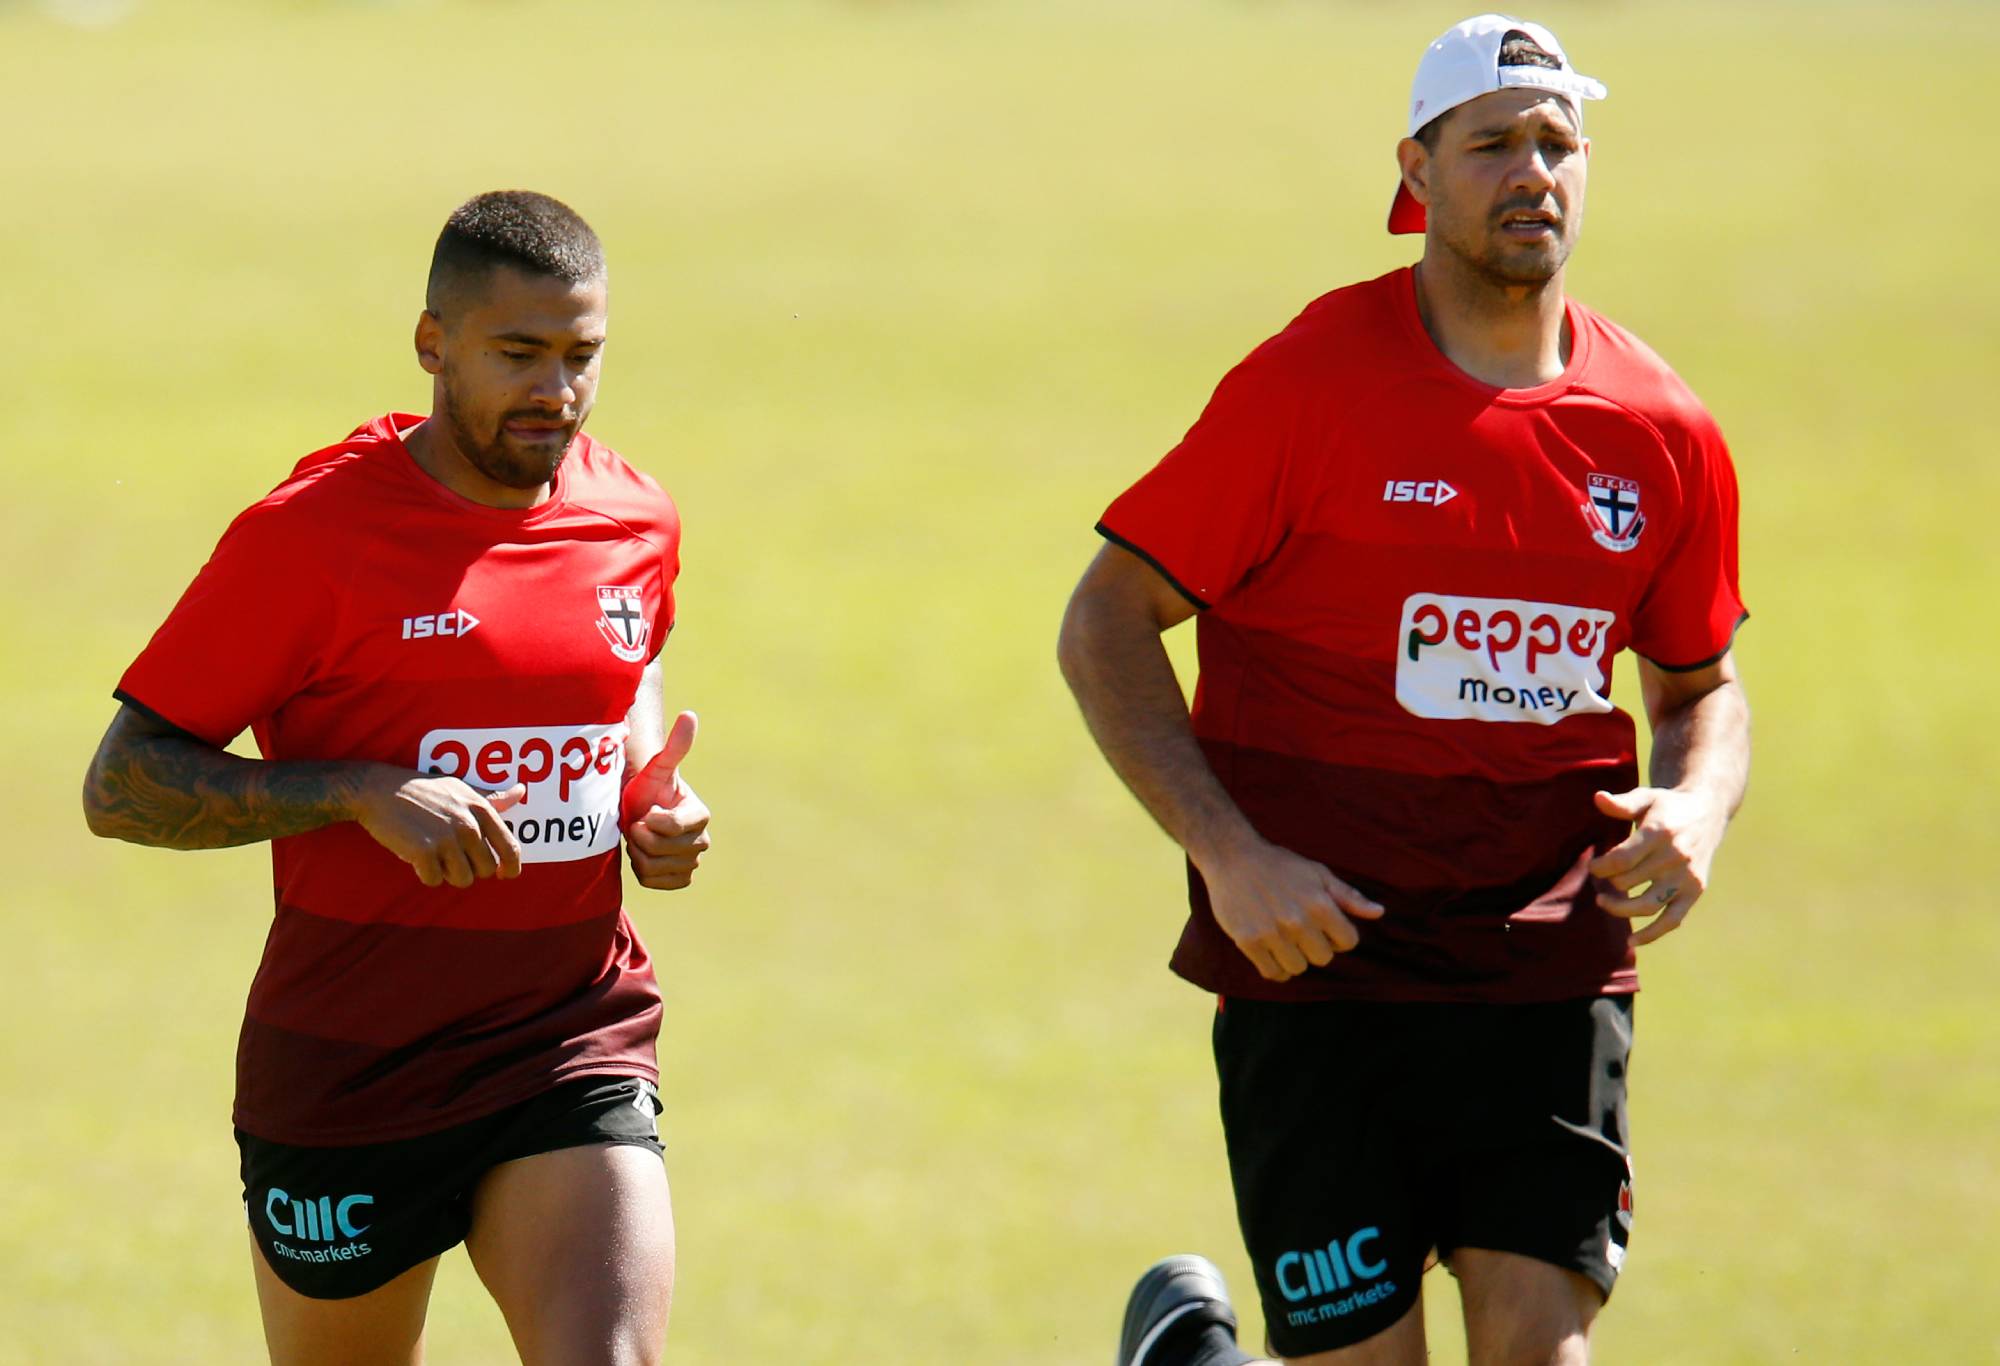 MELBOURNE, AUSTRALIA - NOVEMBER 18: Brad Hill and Paddy Ryder run during a St Kilda Saints AFL Pre-Season Training Session & Media Opportunity at Moorabbin Athletics Track on November 18, 2019 in Melbourne, Australia. (Photo by Darrian Traynor/Getty Images)